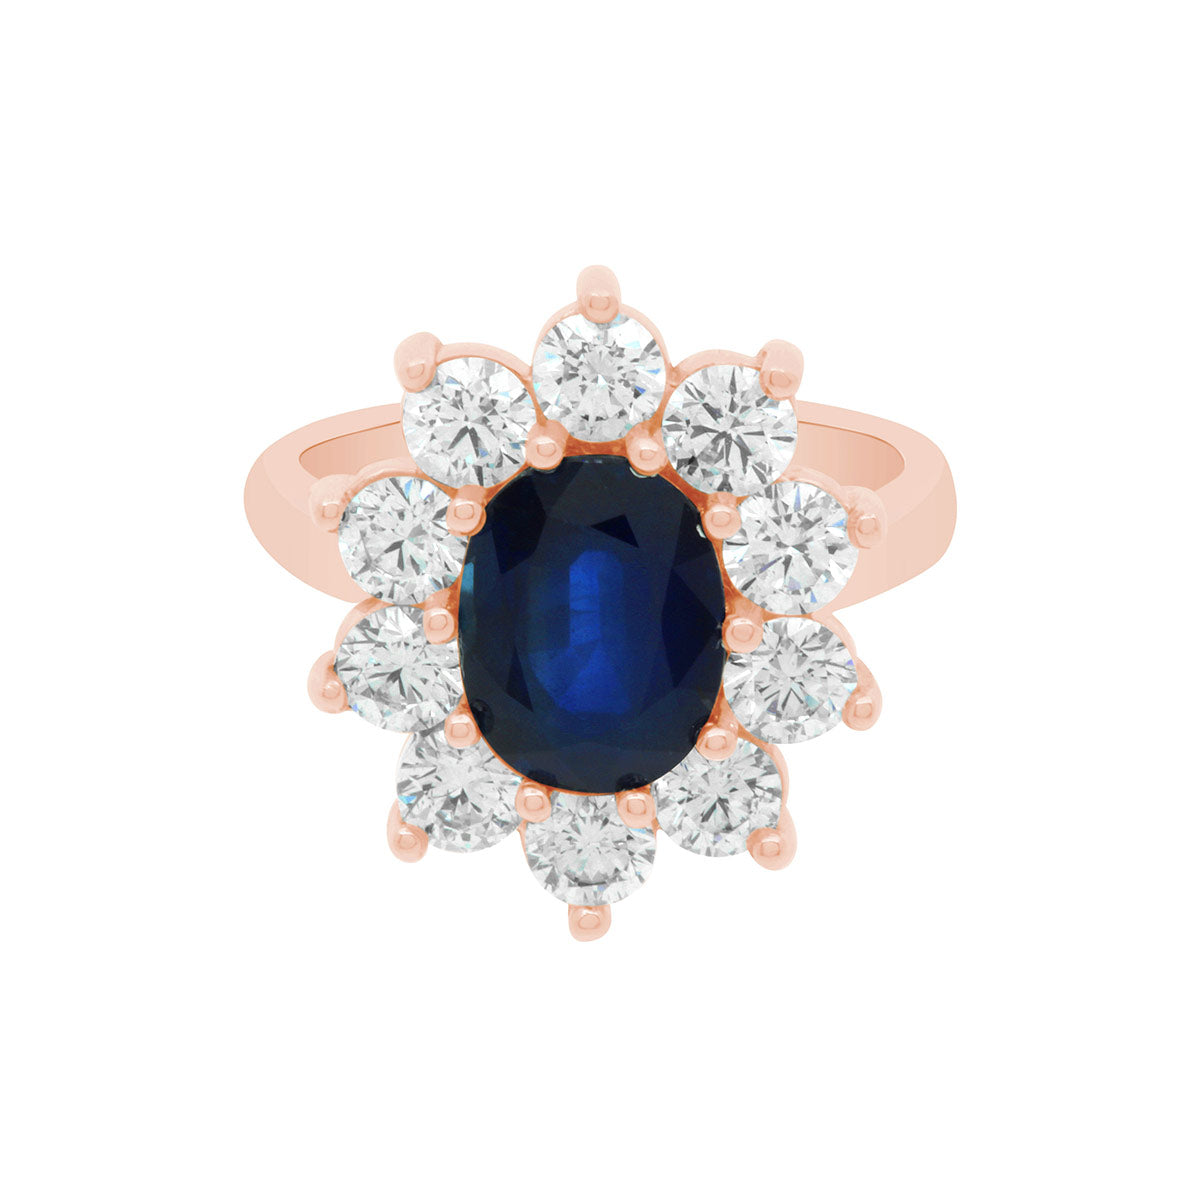 Sapphire Engagement Ring in rose gold with a cluster of sparkling white diamonds